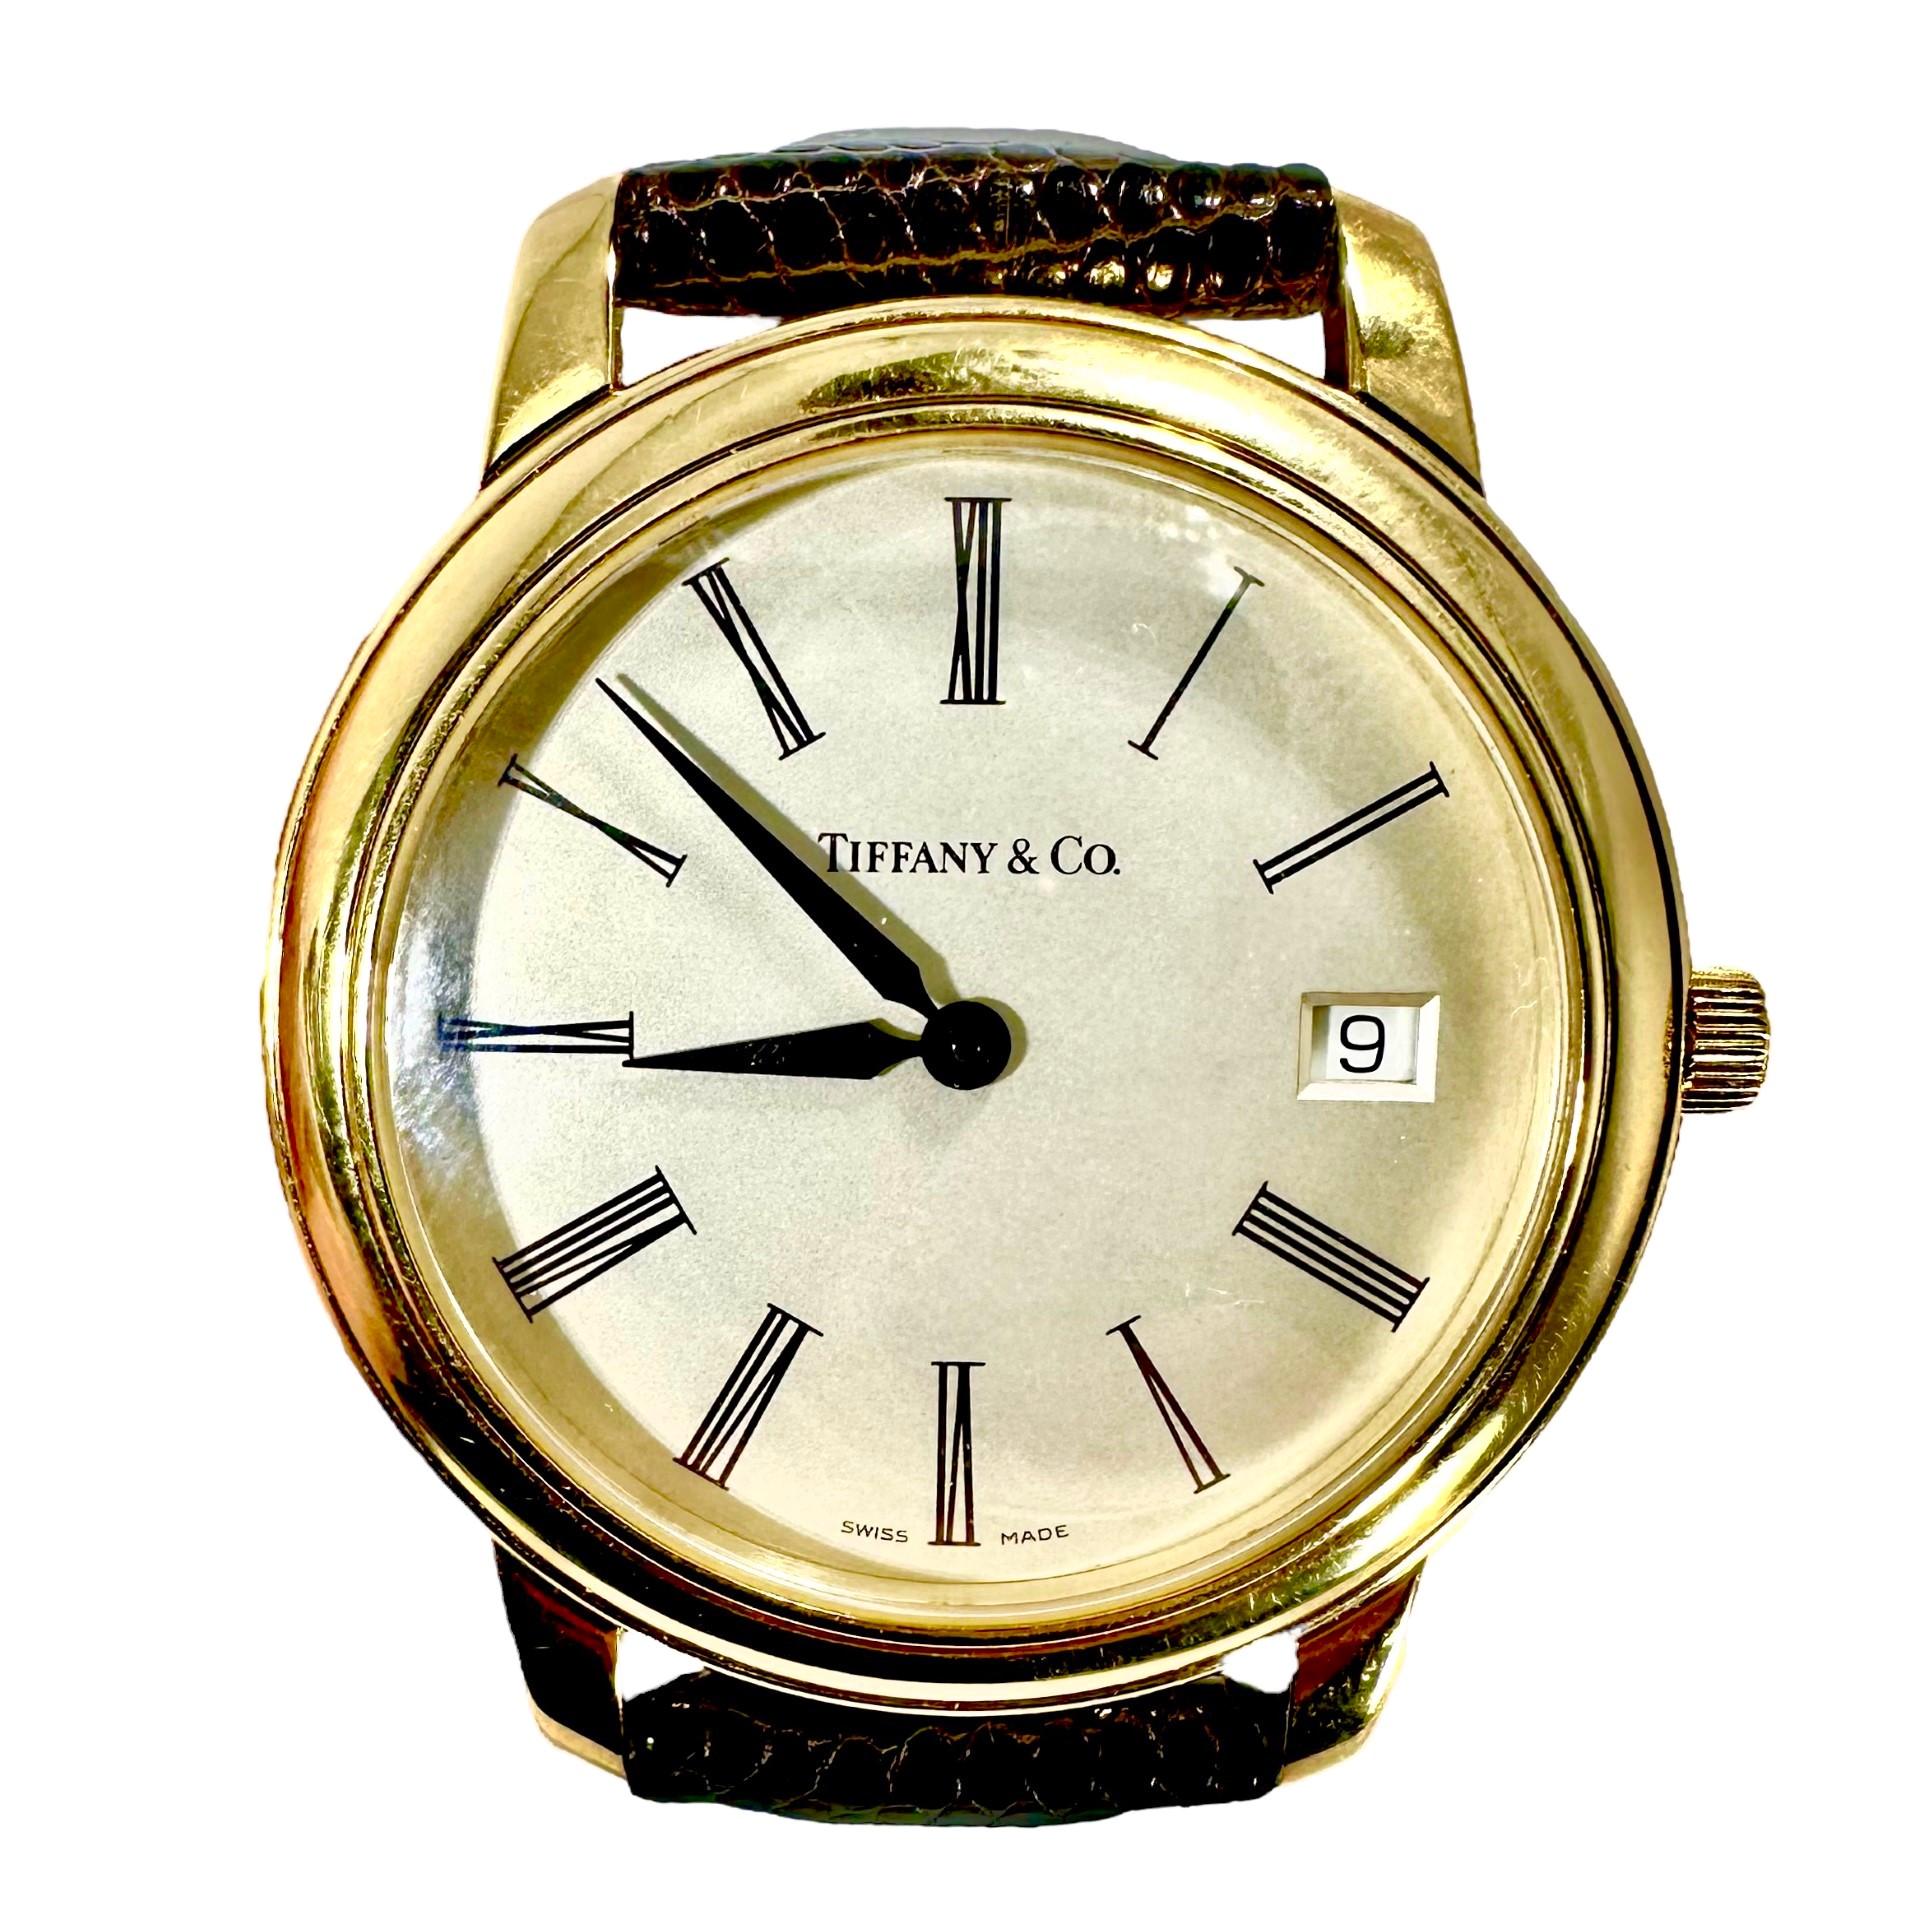 This truly classic Tiffany & Co. quartz movement men's wrist watch epitomizes the luxury and elegance that Tiffany is perennially associated with. It is large, measuring a full 1 1/2 inches in diameter and 1 3/4 inches from lug tip to lug tip. The